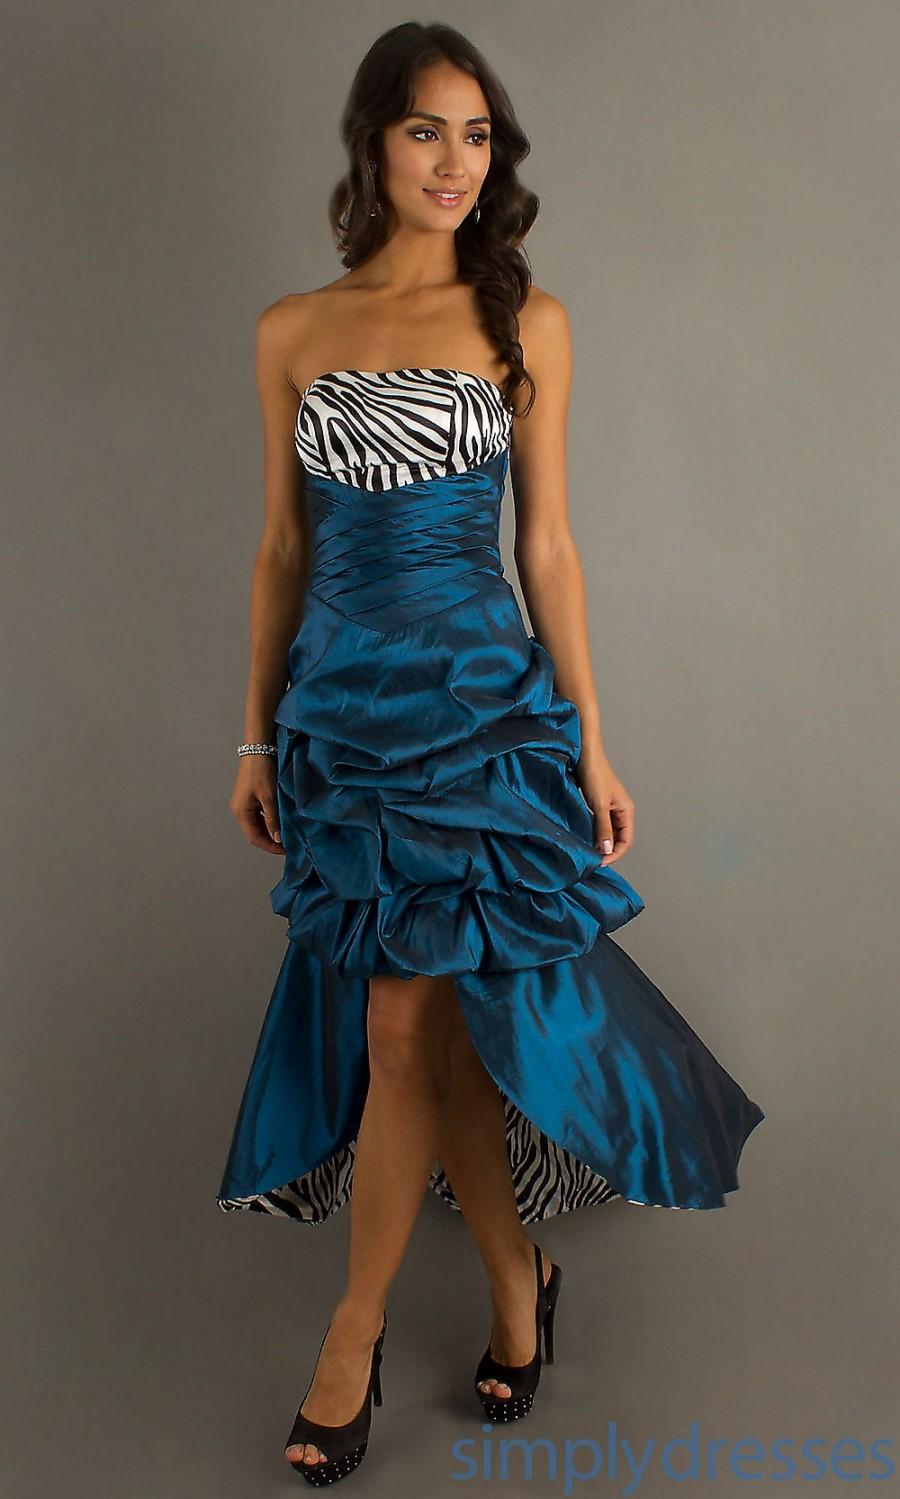 Wedding - New Ruched Strapless Taffeta A-line Royal Blue Bubble Prom/cocktail/homecoming Dress - Cheap Discount Evening Gowns